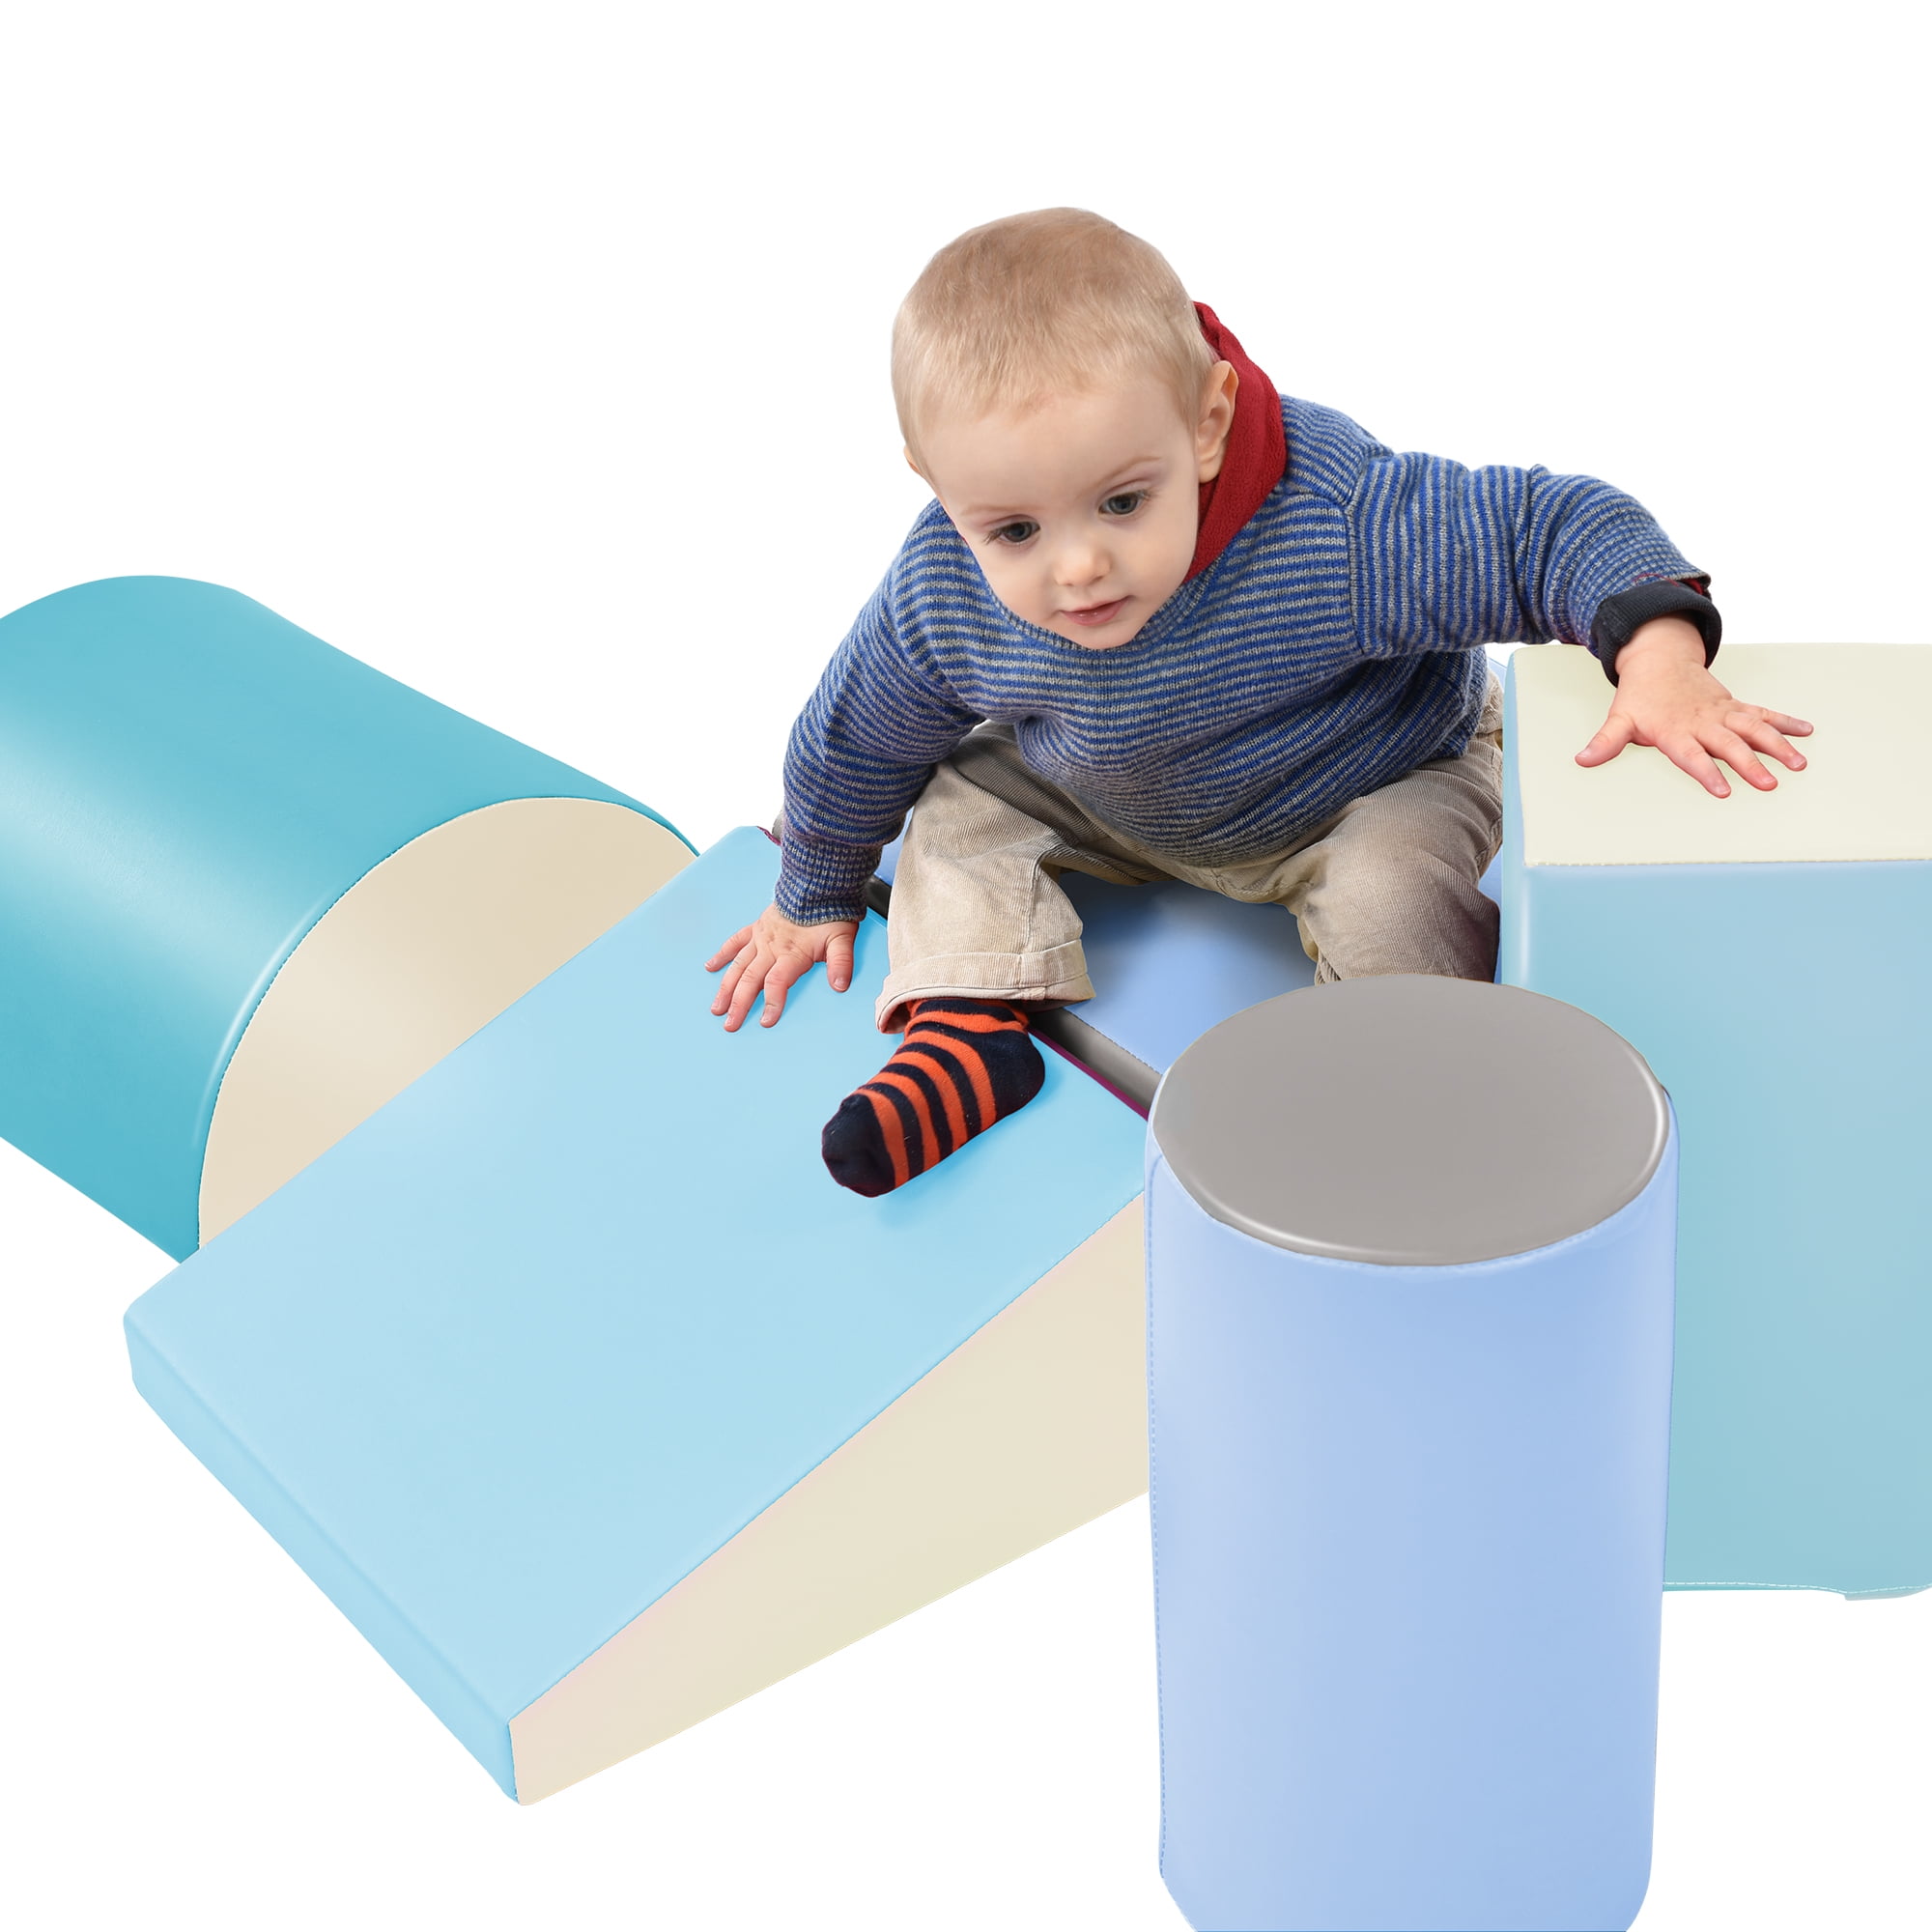 Kids Play and Develop Foam Shapes Playset